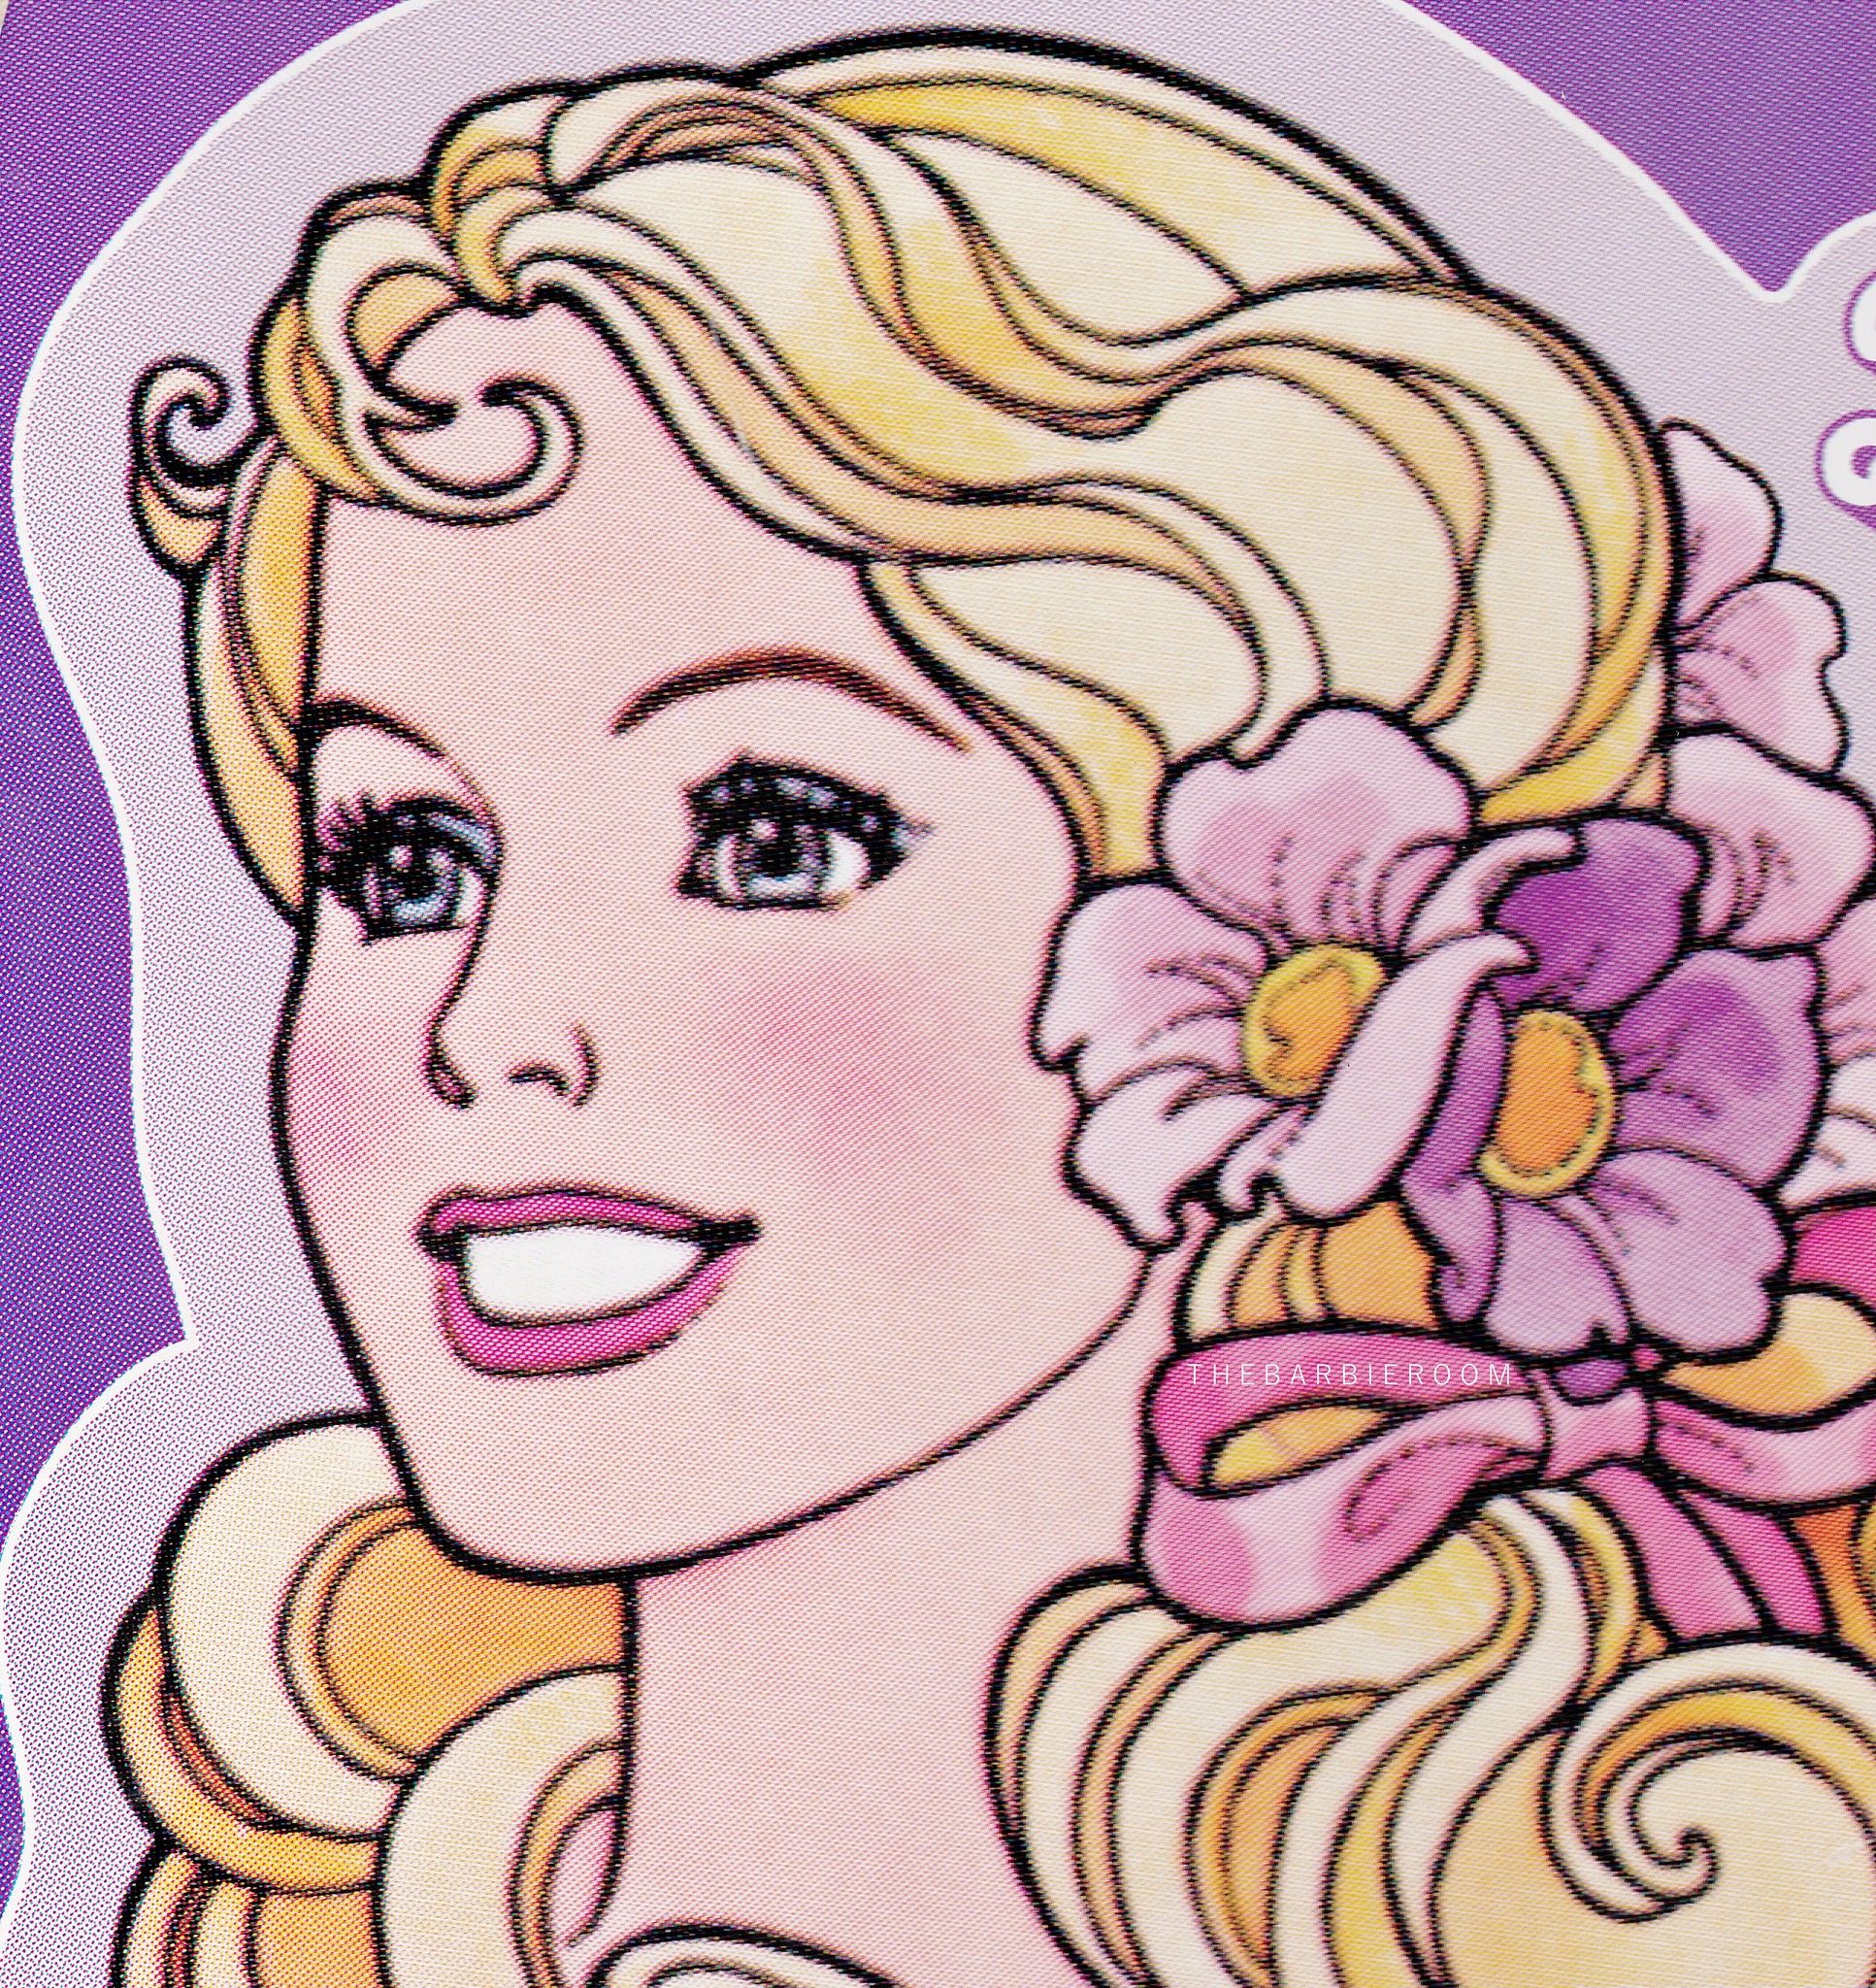 Close-up of the face of a smiling Barbie doll, wearing a pink dress and a pink flower in her hair. - Barbie